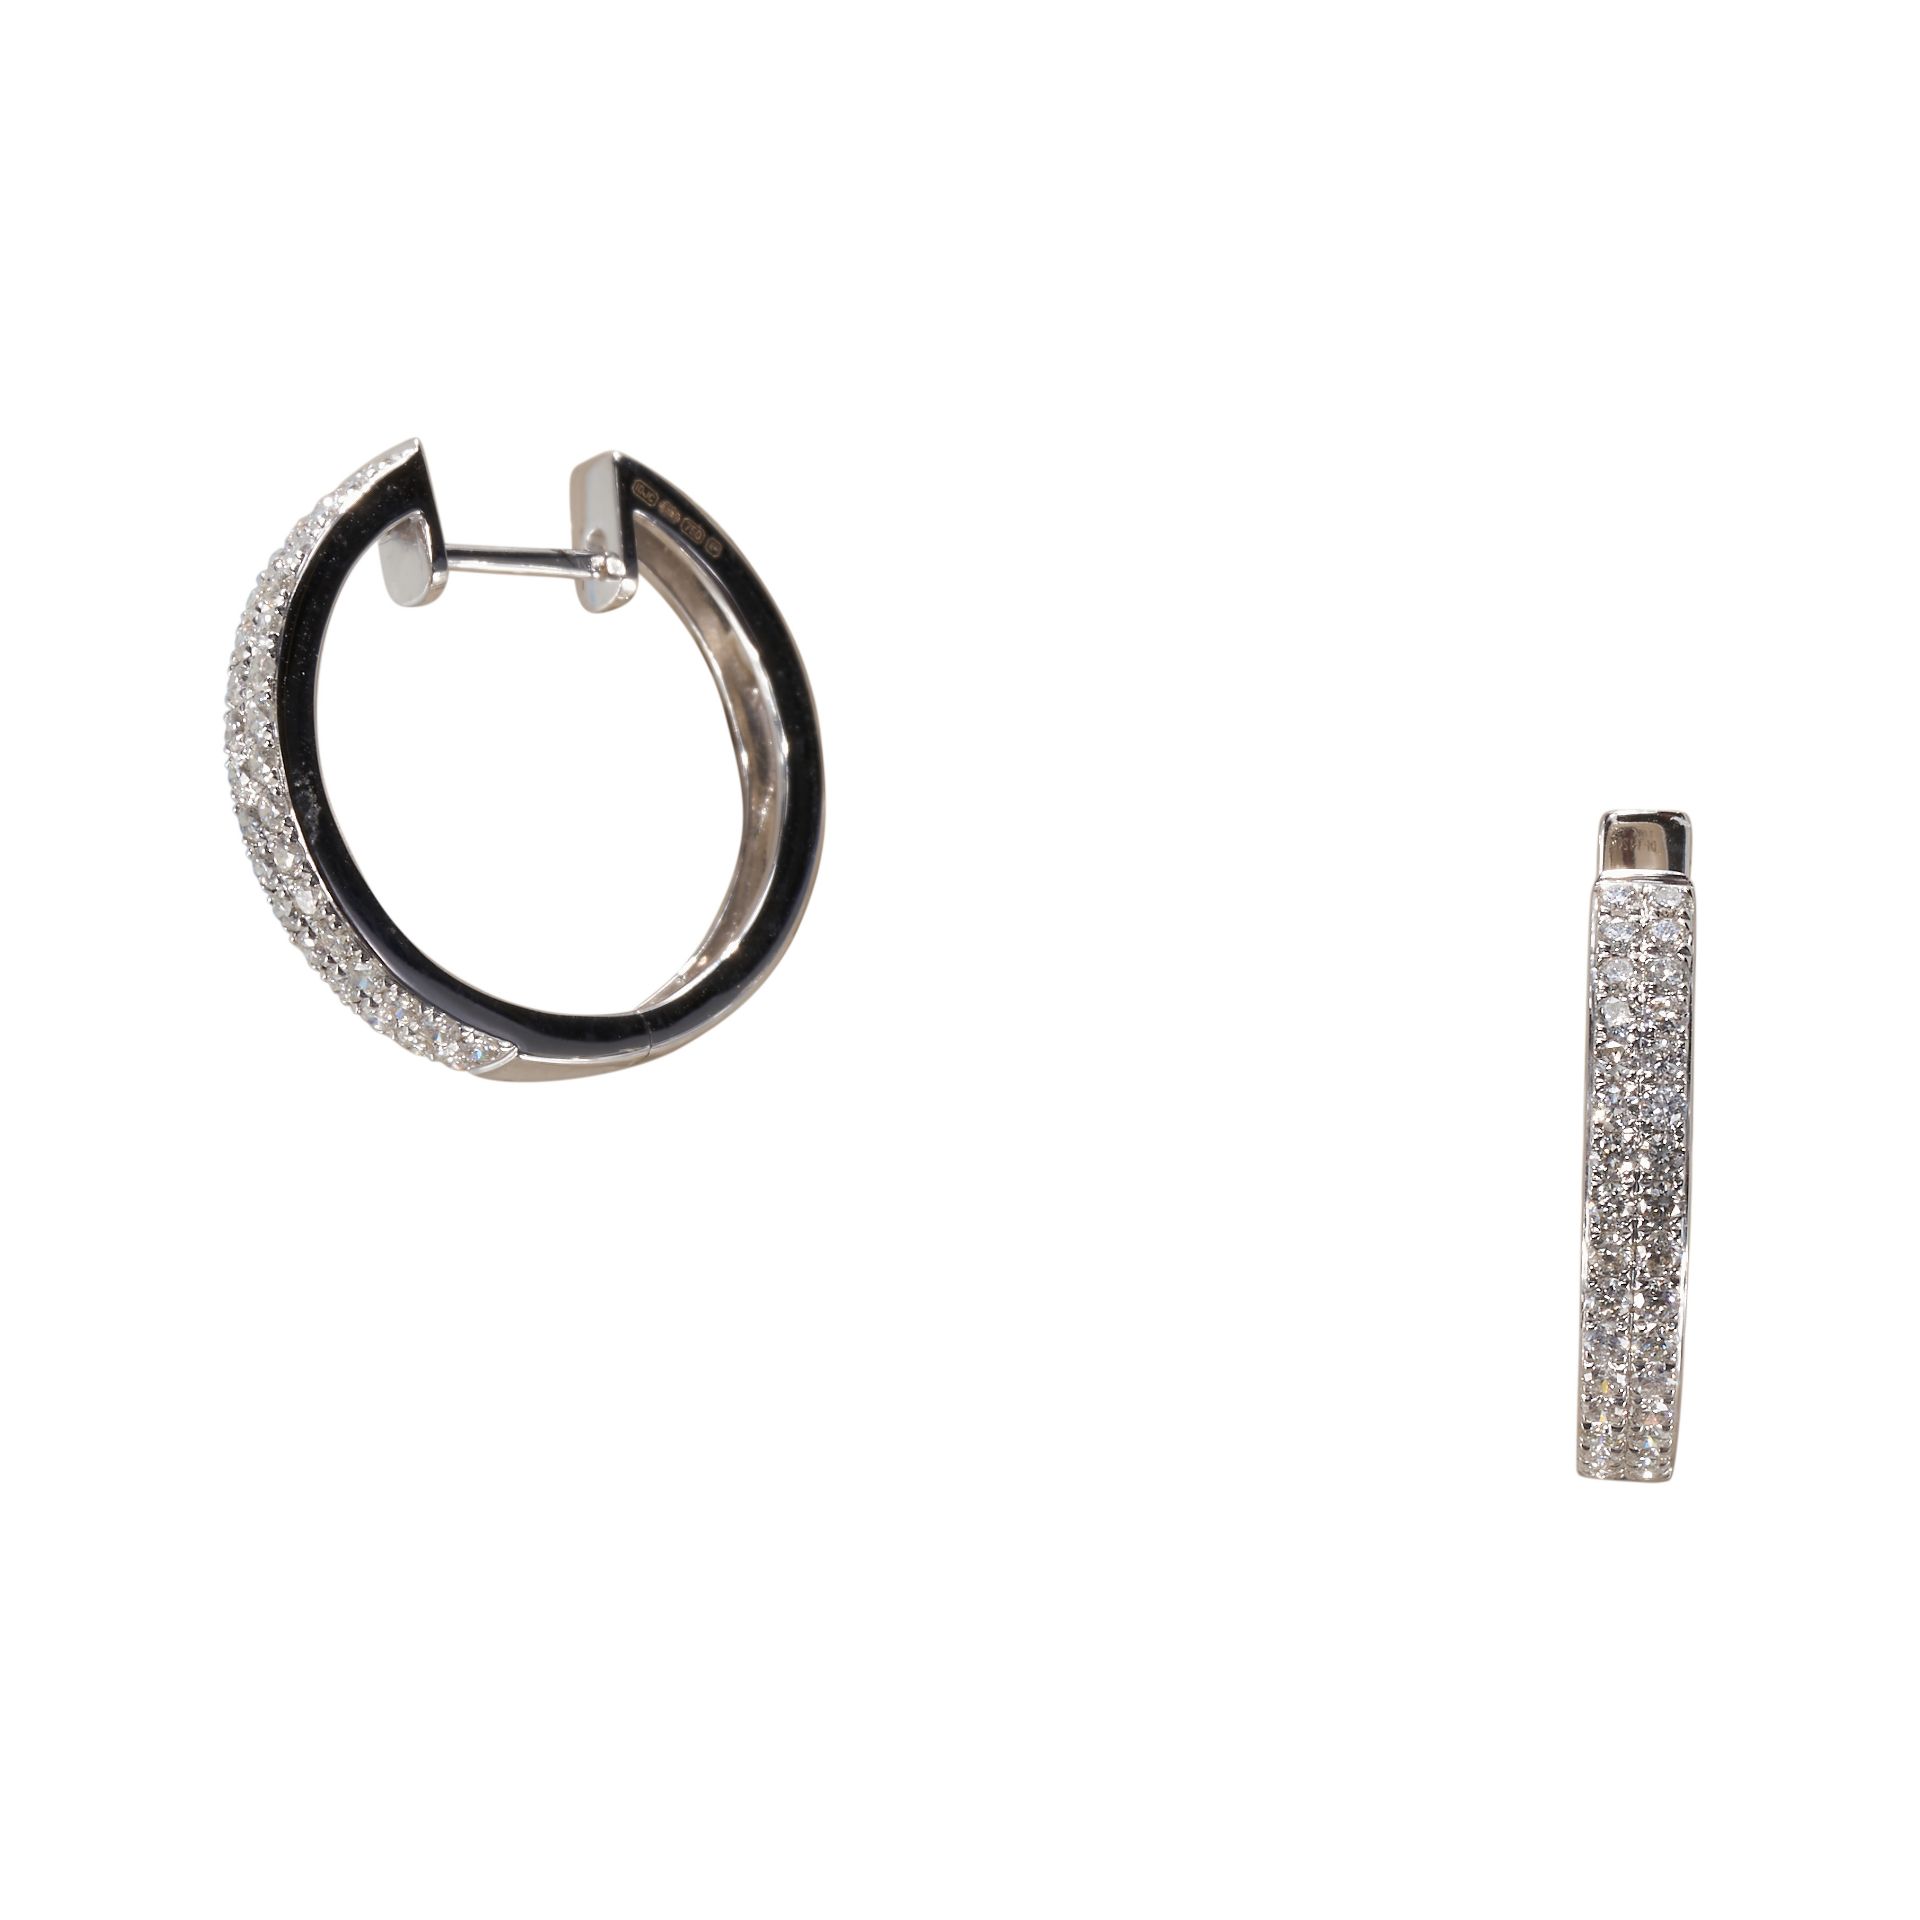 A DOUBLE ROW DIAMOND HOOP EARRINGS, IN 18CT WHITE GOLD MOUNT. - Image 2 of 2